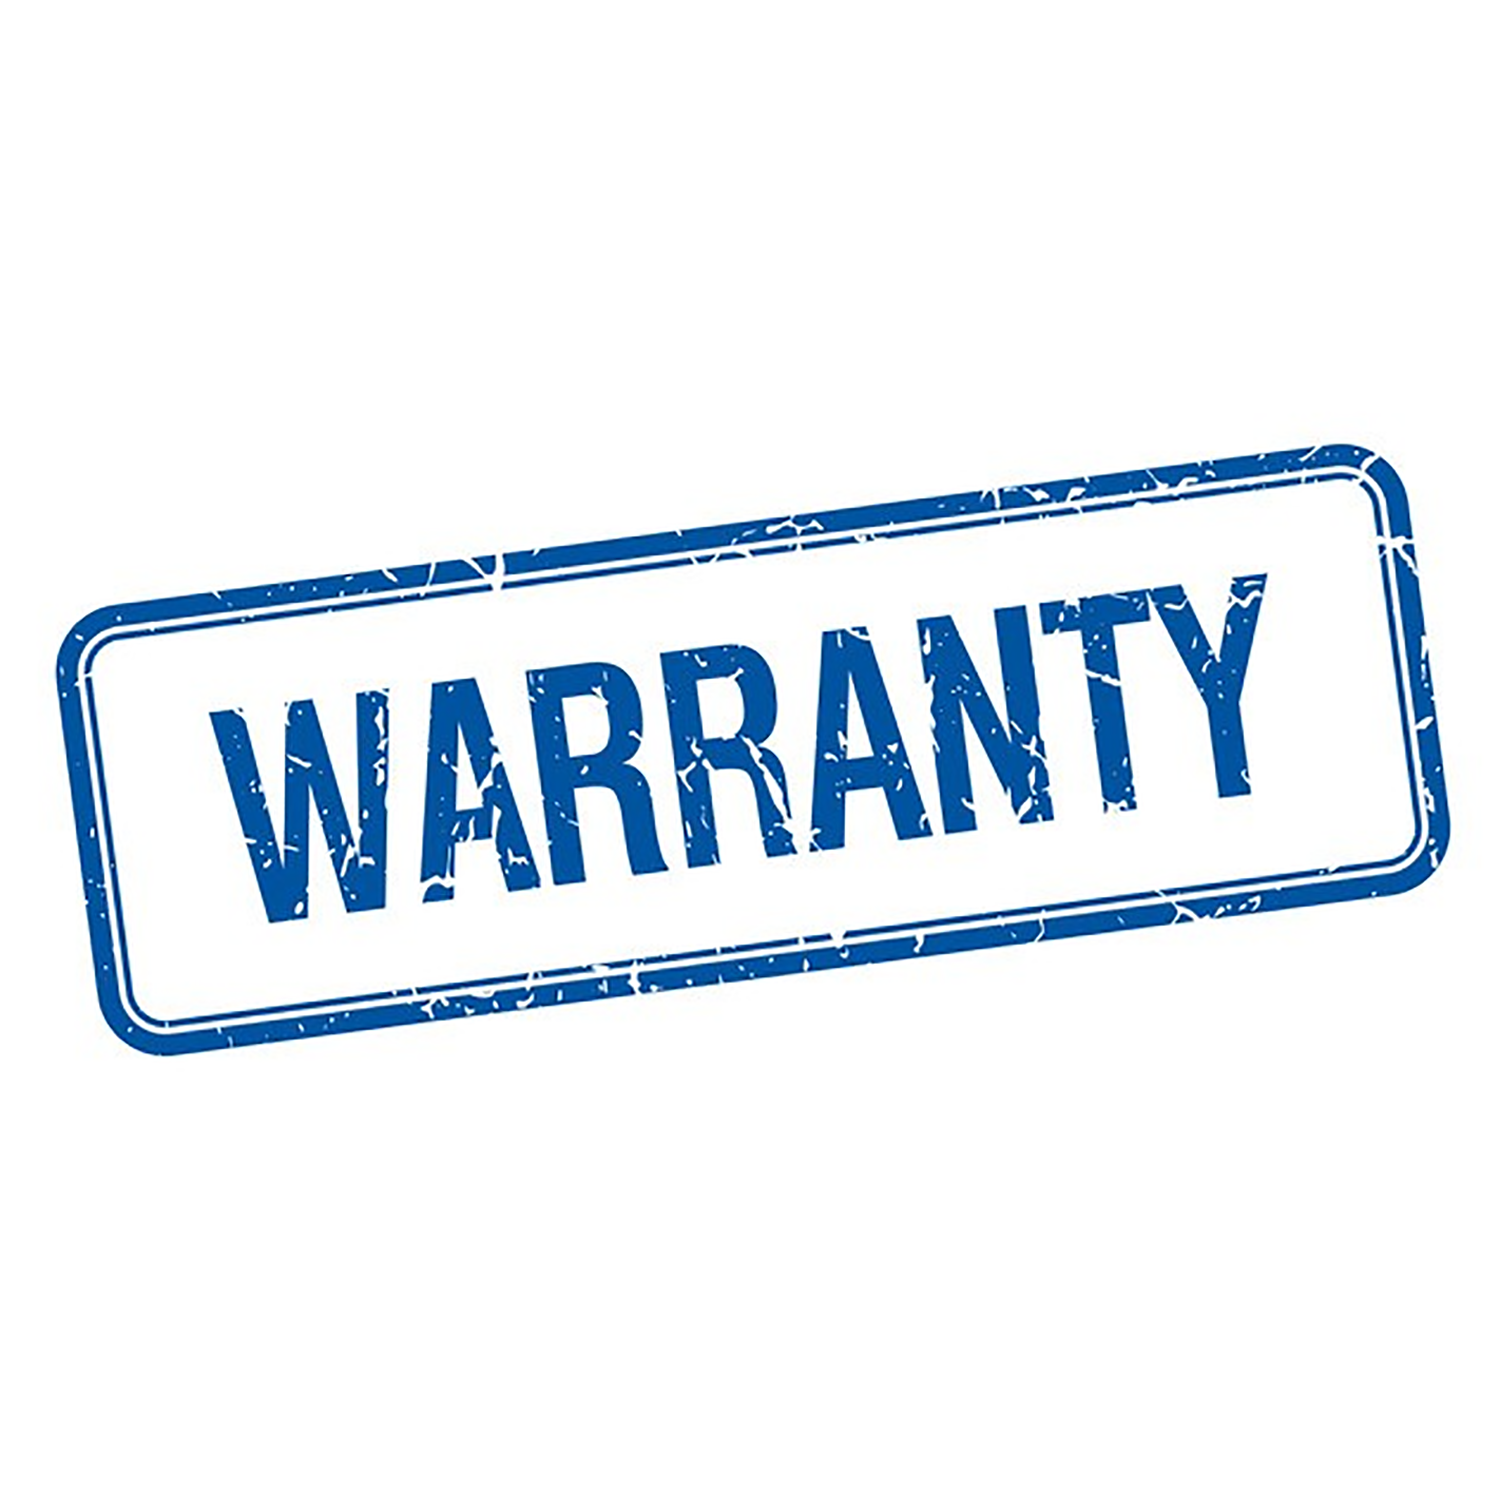 Extended 2 year comprehensive warranty for the secaCT8000p-2